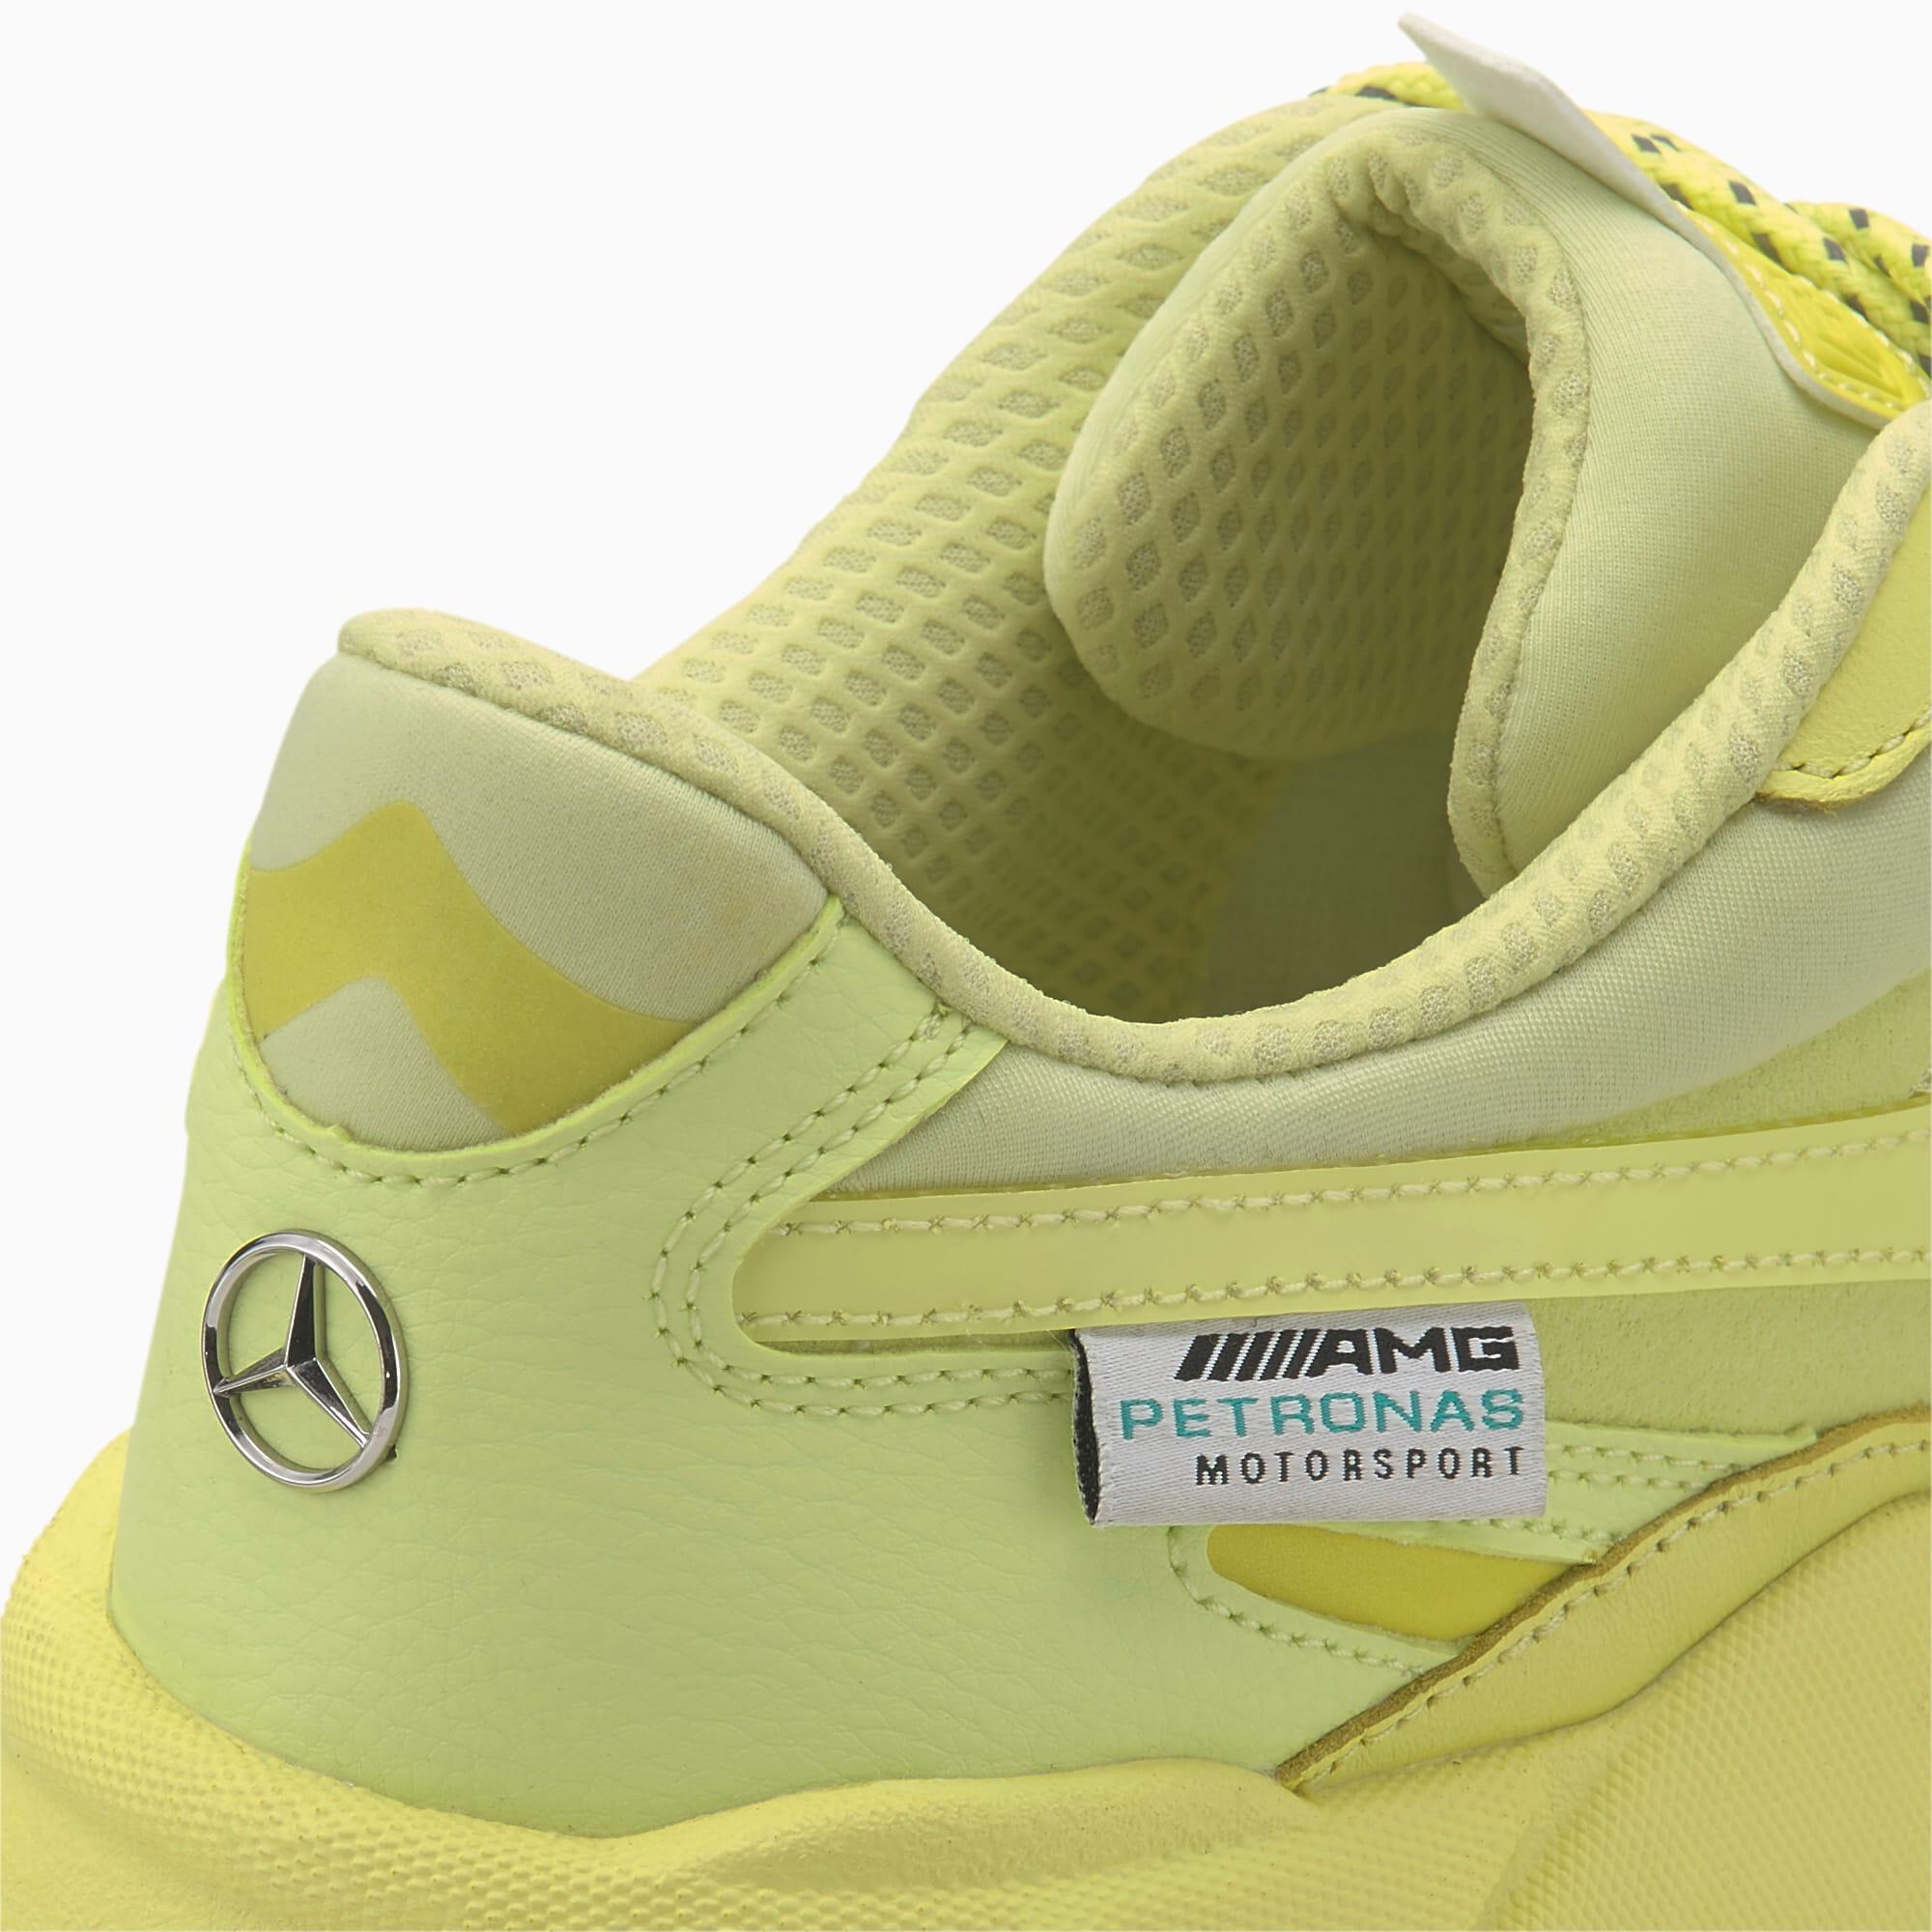 PUMA Synthetic Mercedes Amg Petronas Rs-x3 Sneakers in Green for Men - Lyst